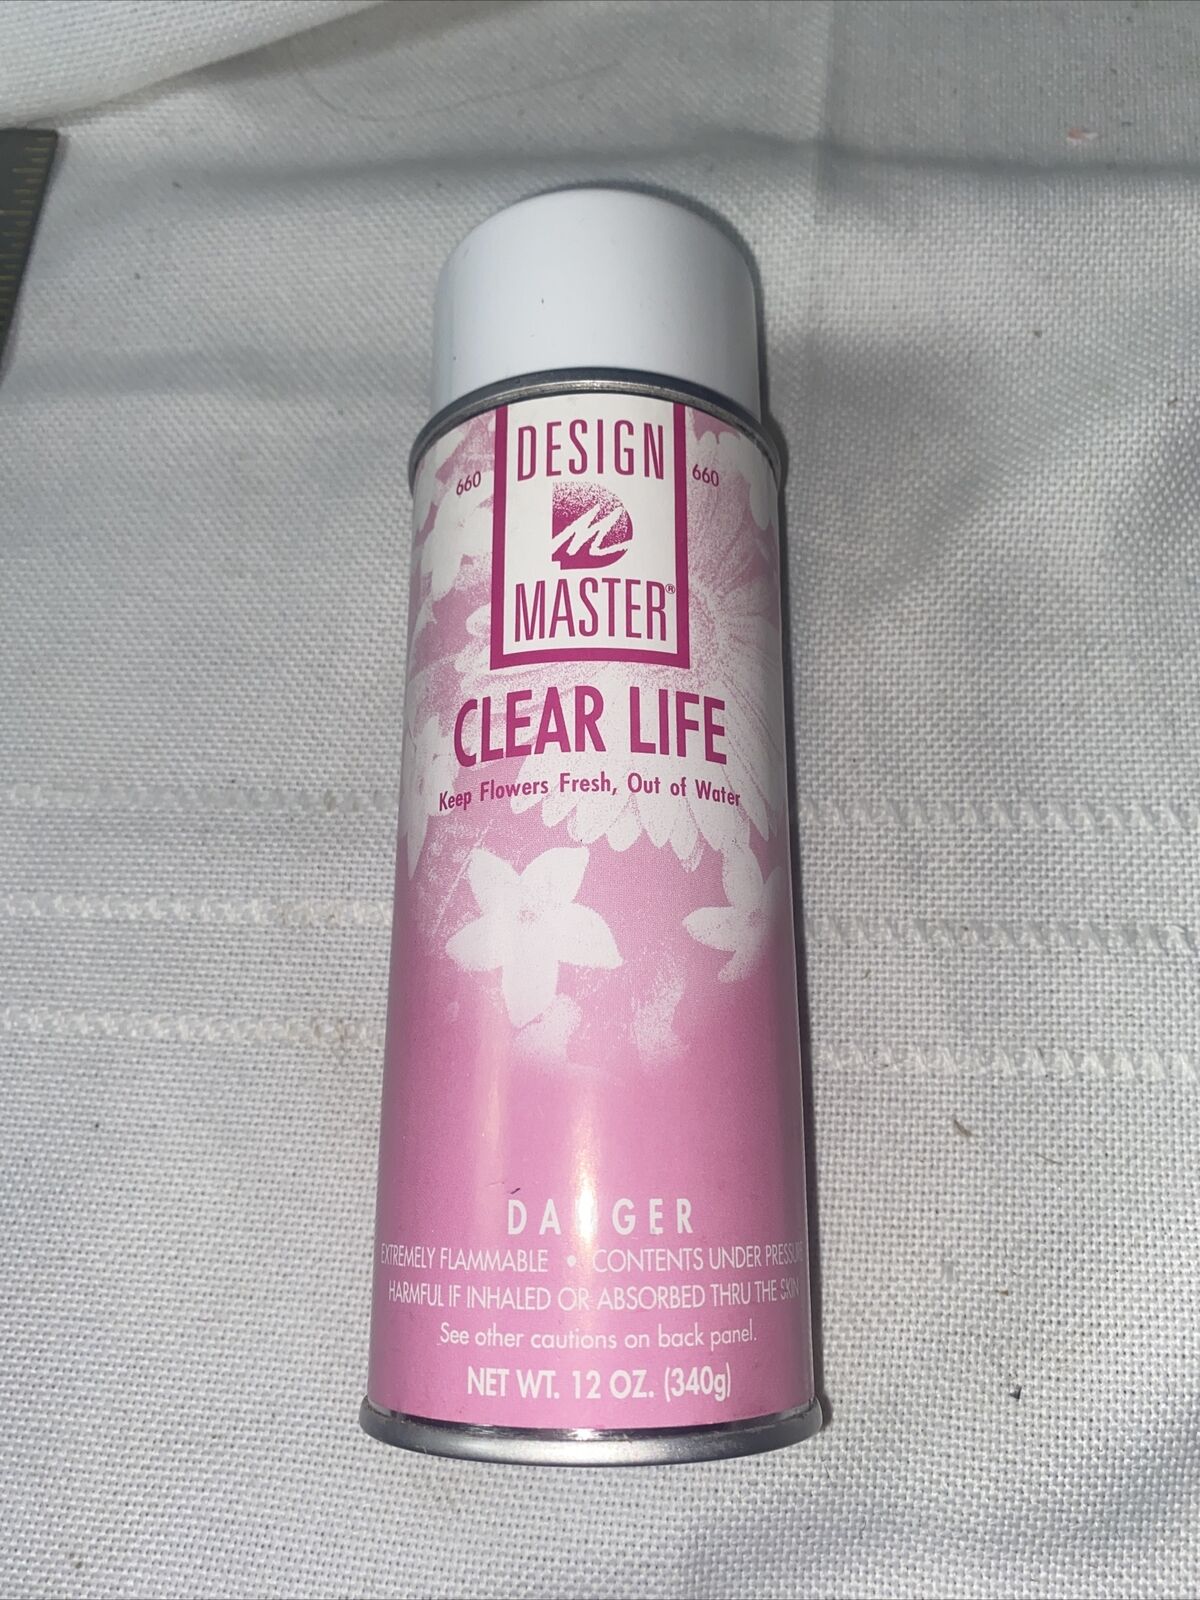 Design Master 660 Clear Life Keep Flowers Fresh Out Of Water￼